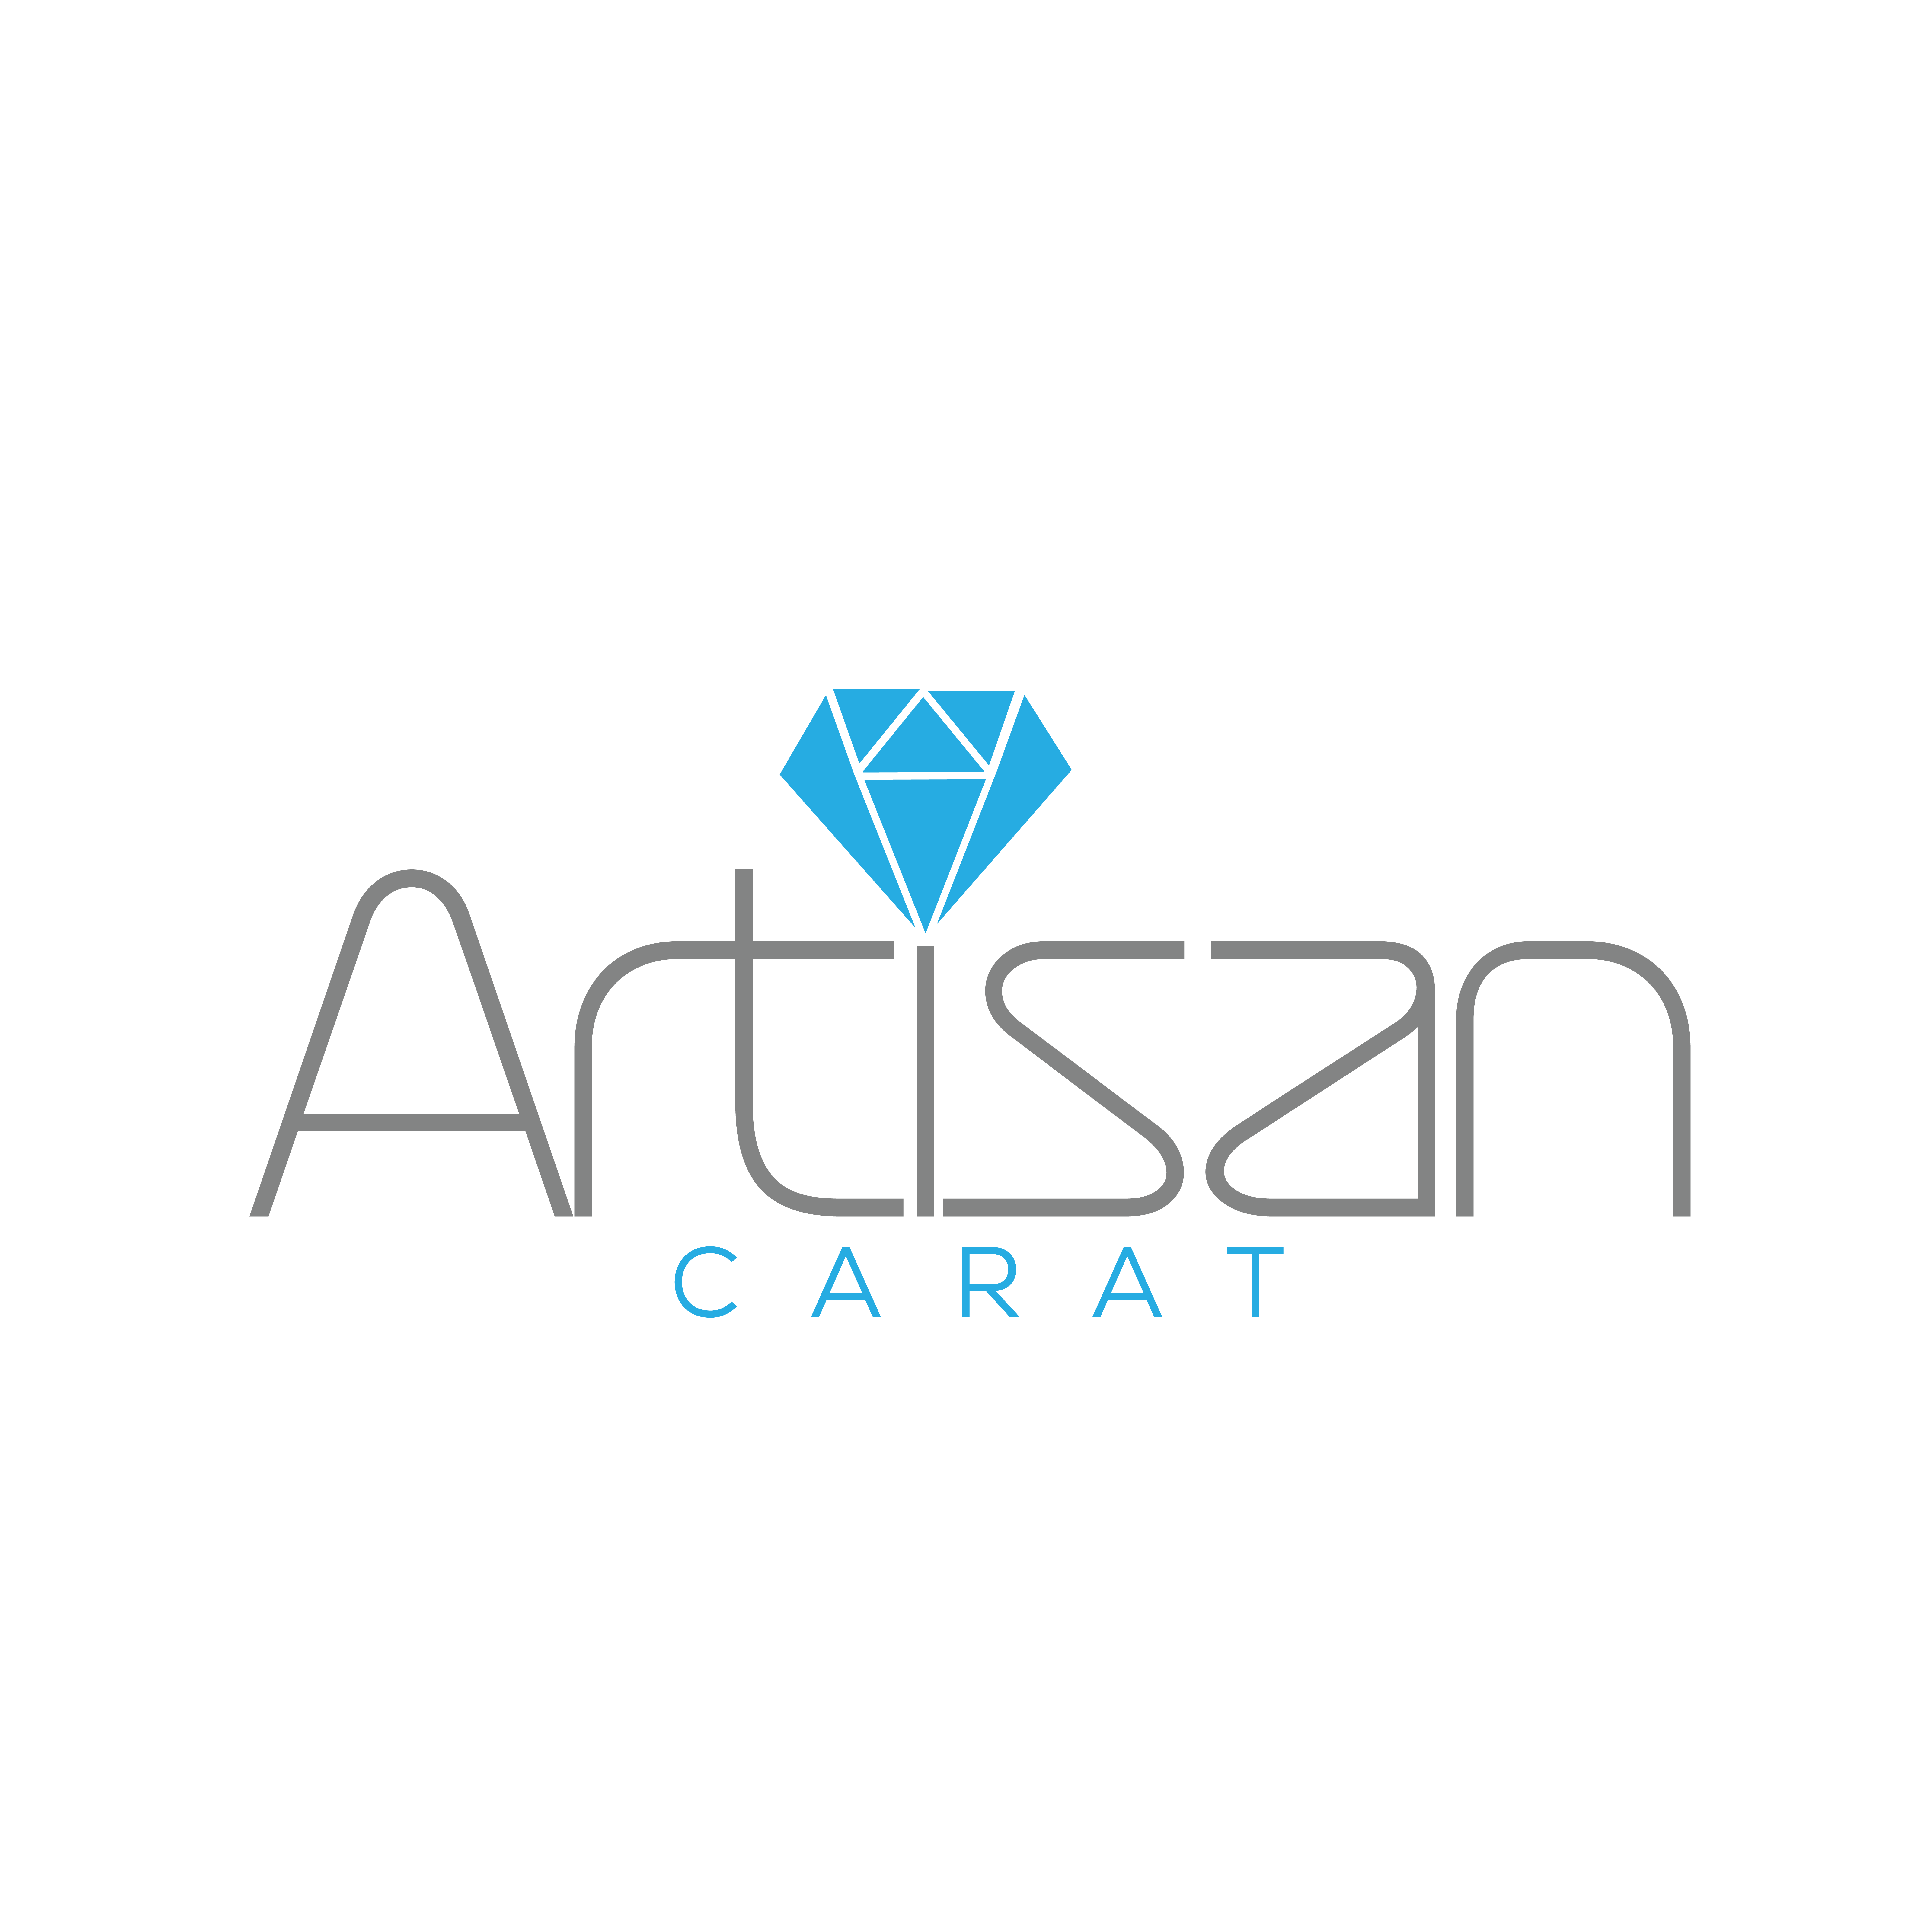 Launched last year by jeweler and entrepreneur, Daniel Fayzakov, Artisan Carat is an online marketplace of fine jewelry with philanthropy at its heart.